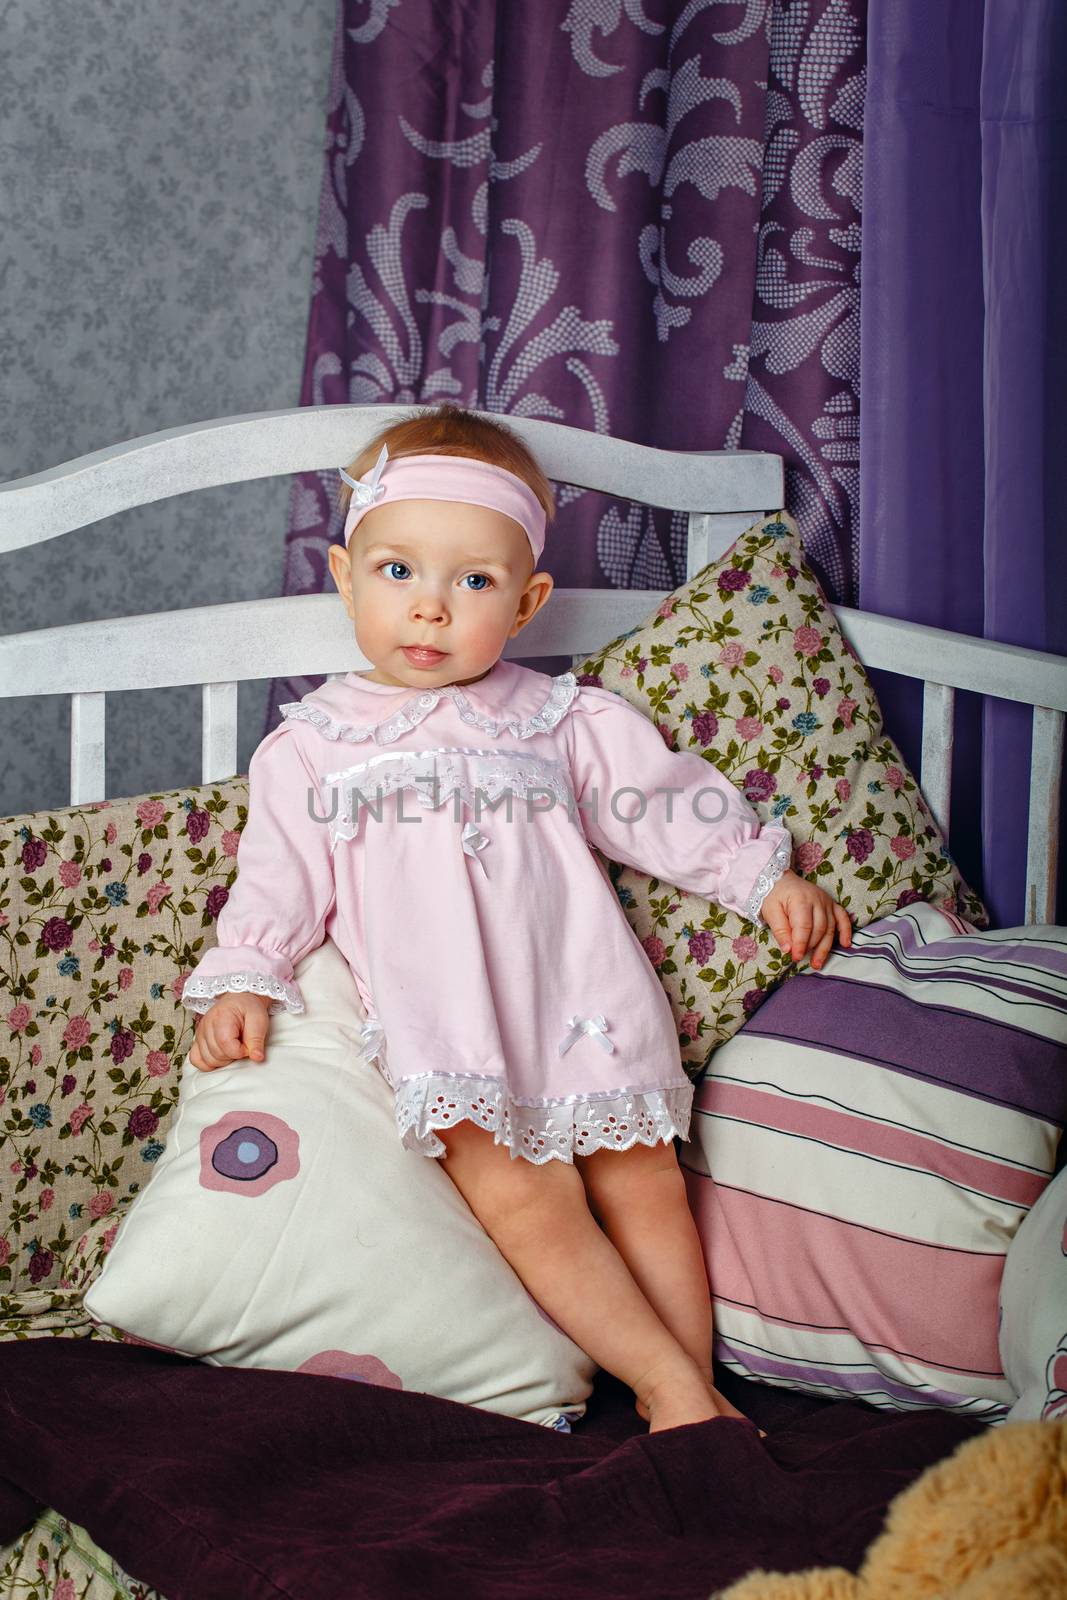 Little girl in the nursery stands leaning on pillows on a cot